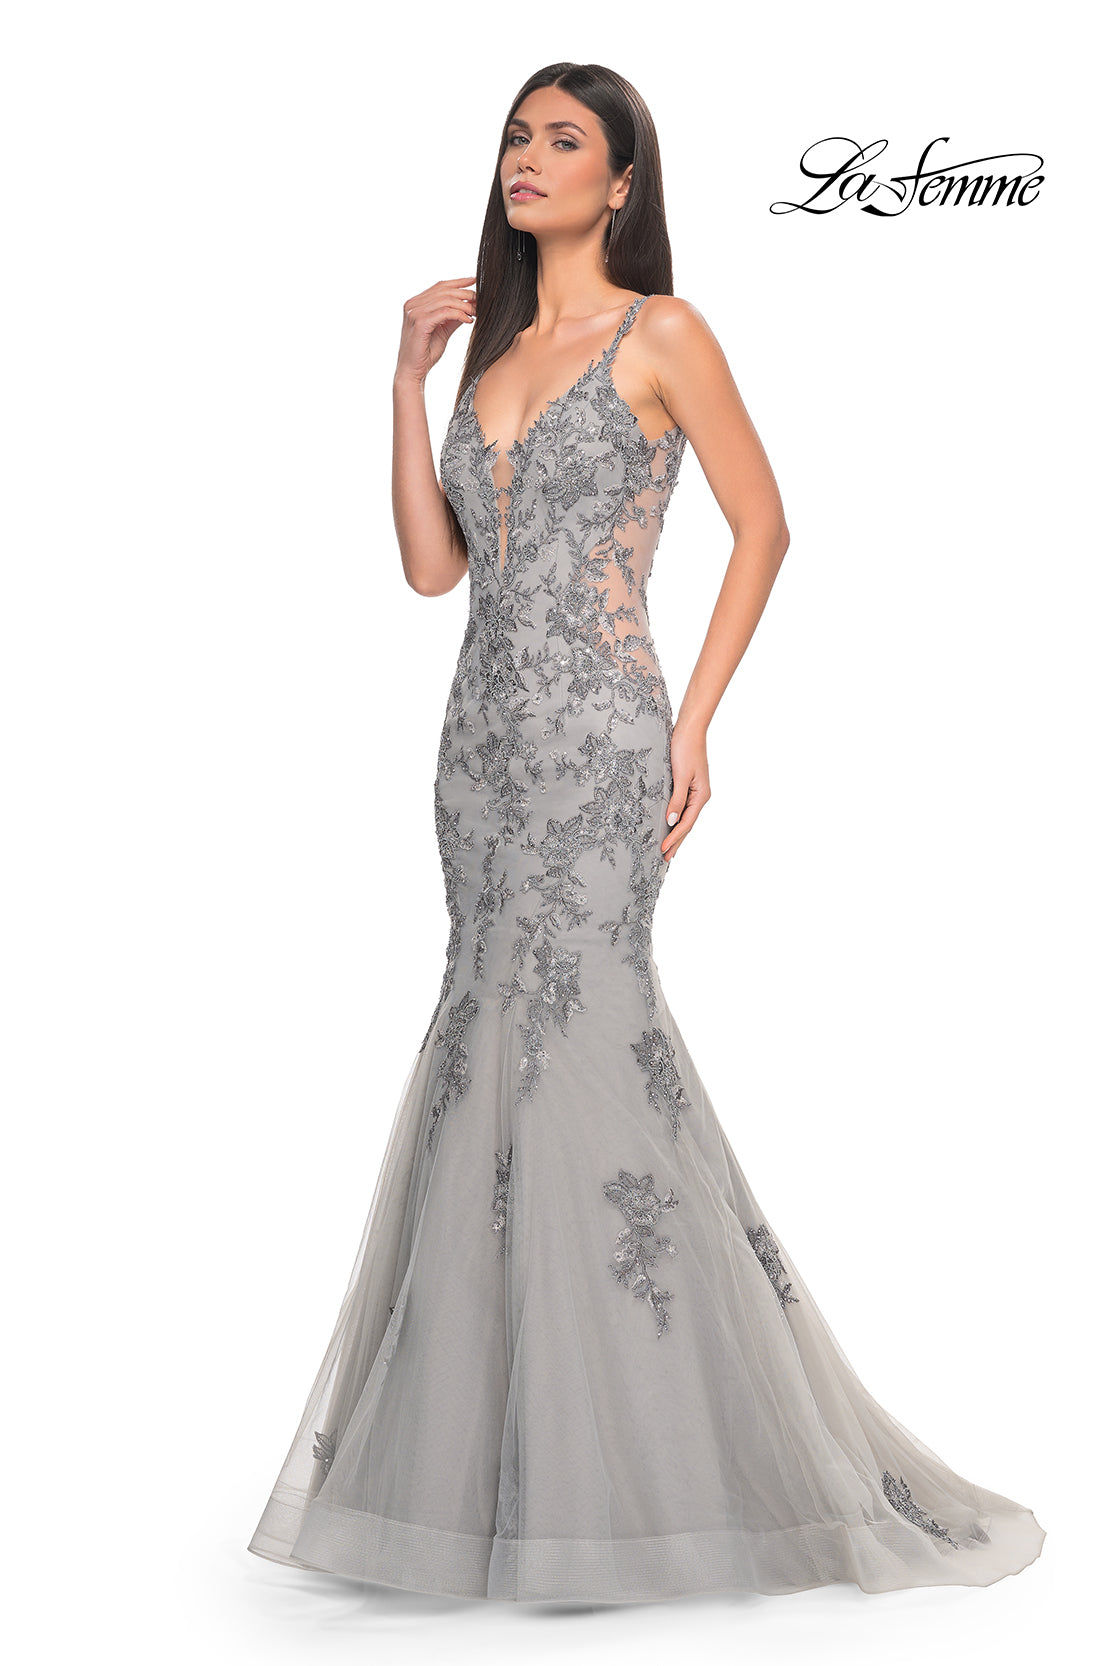 La Femme 32295 - An enchanting mermaid gown with lace applique and illusion mesh sides, perfect for a classic yet modern look at prom or evening events.